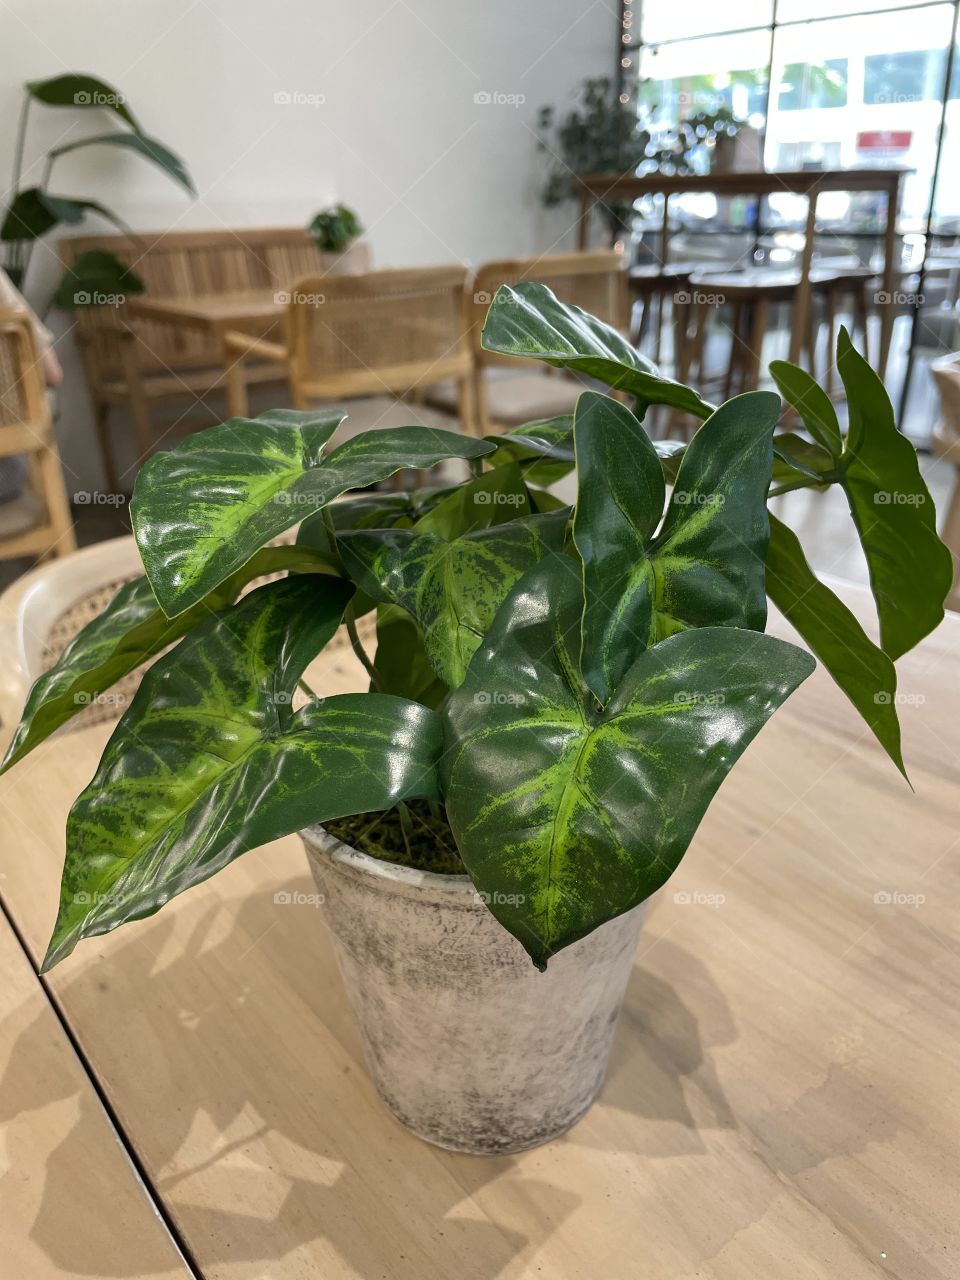 Plastic indoor plant that adds color and beauty to the space.